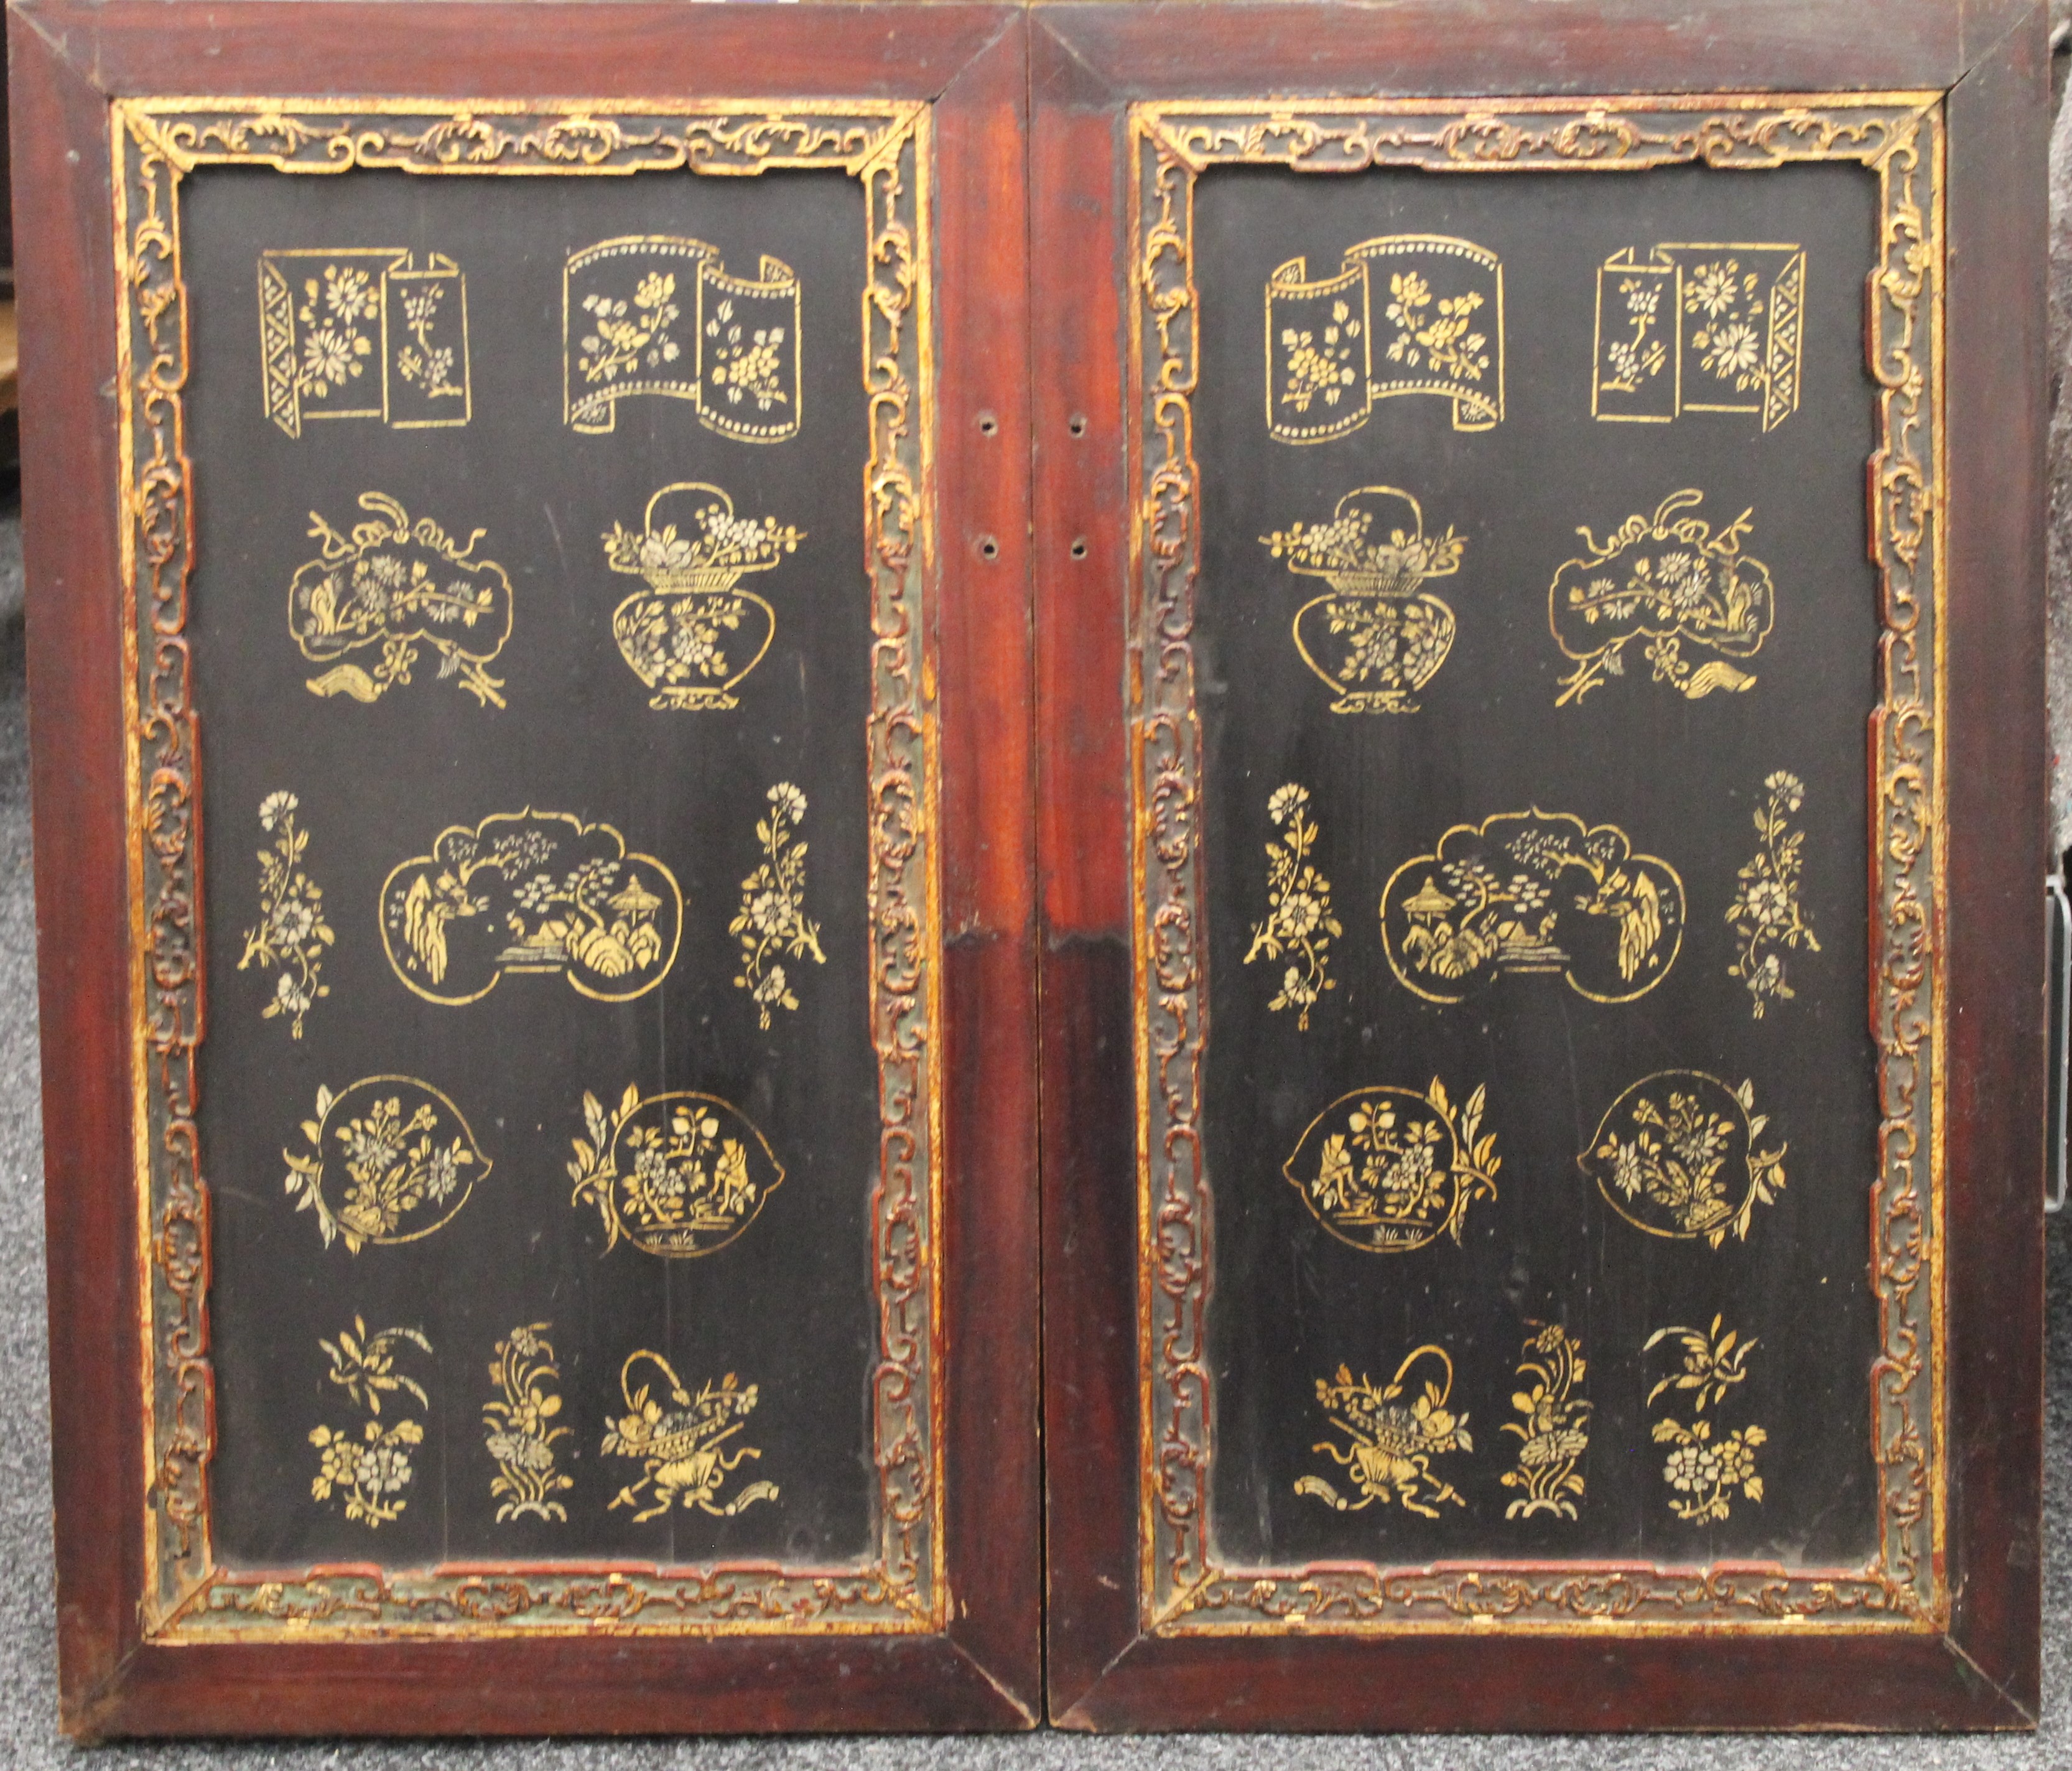 A pair of Chinese lacquered door panels. Each 46 x 80 cm.